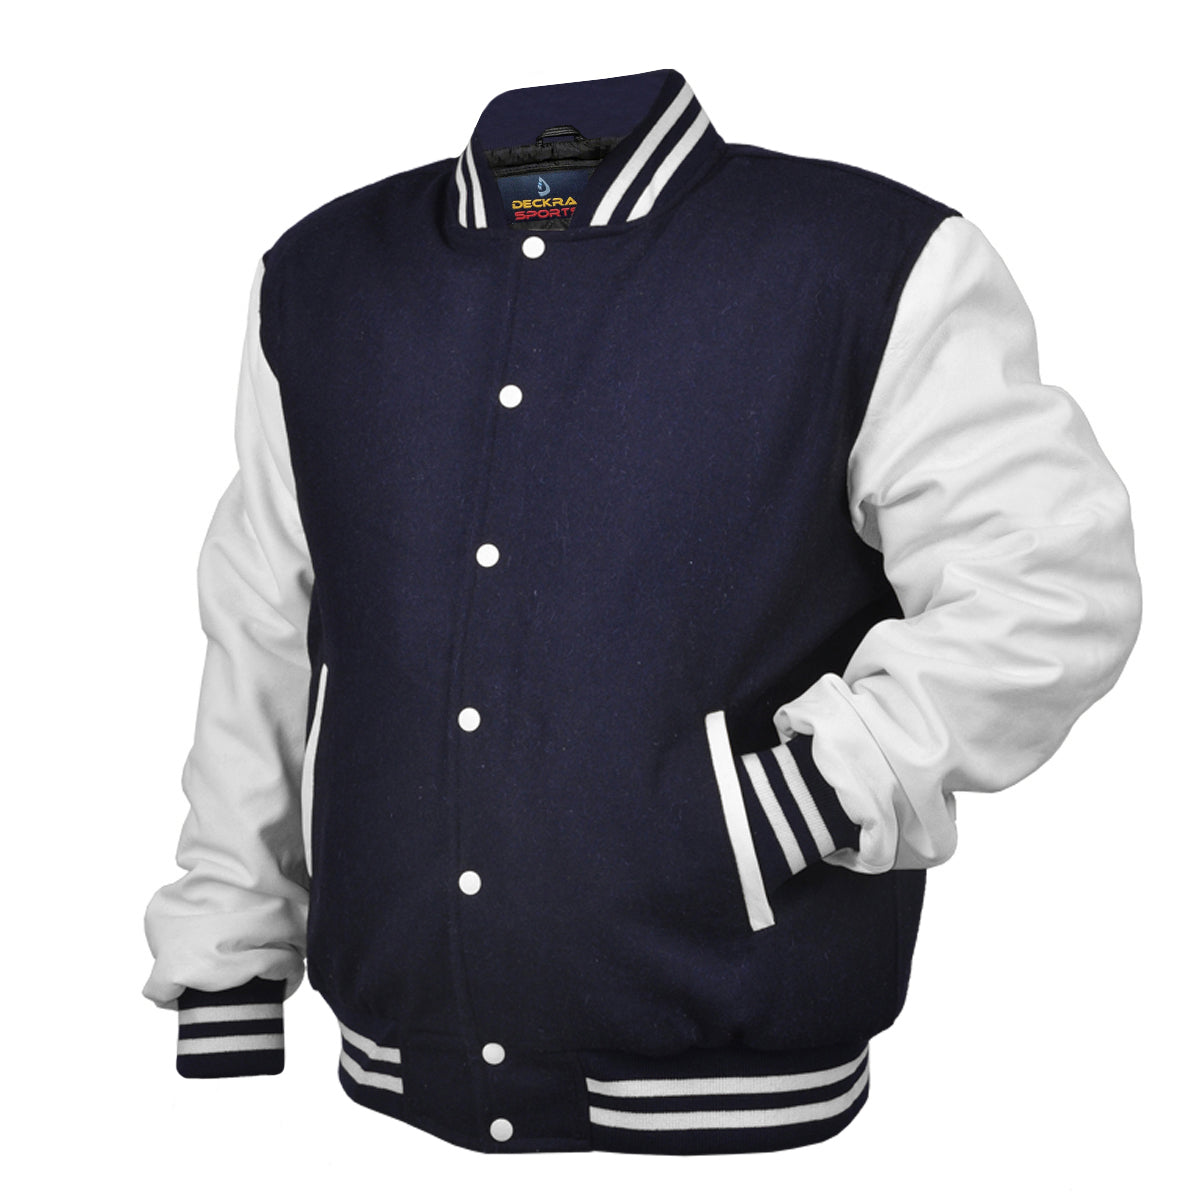 Men’s Varsity Jacket Faux Leather Sleeve and Wool Body Navy/White